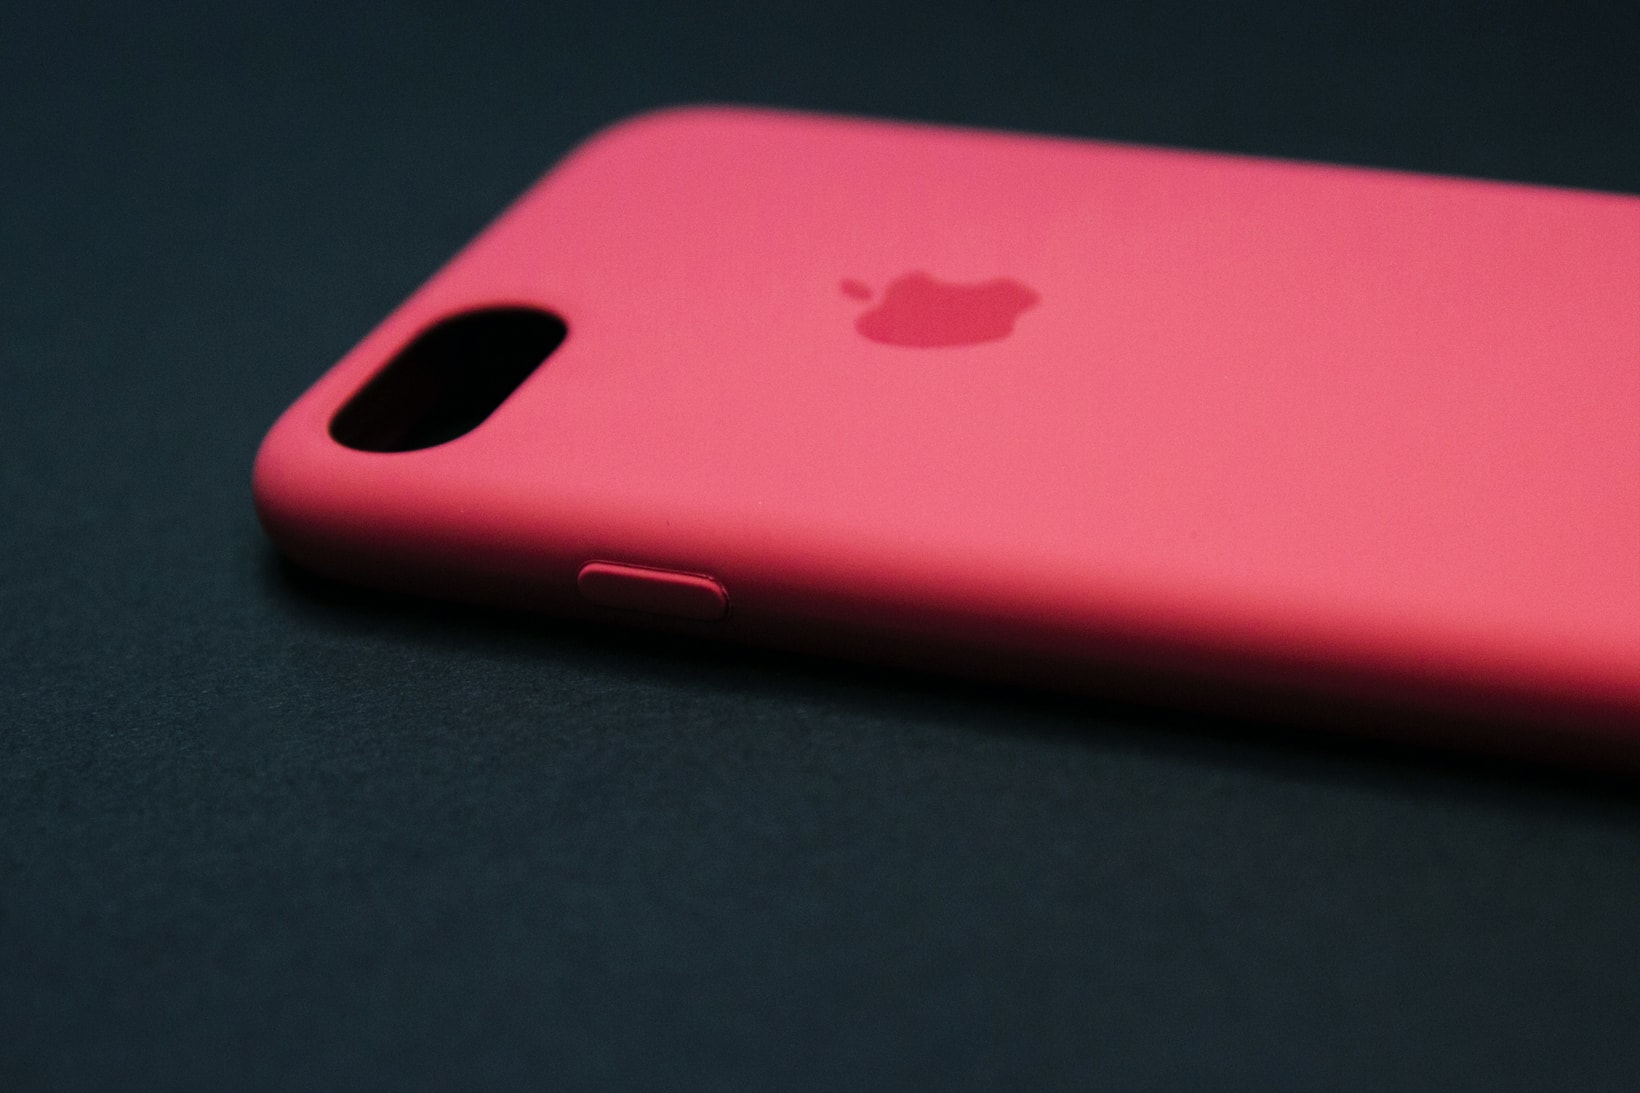 Apple PRODUCT(RED) iPhone 7 Closer Look